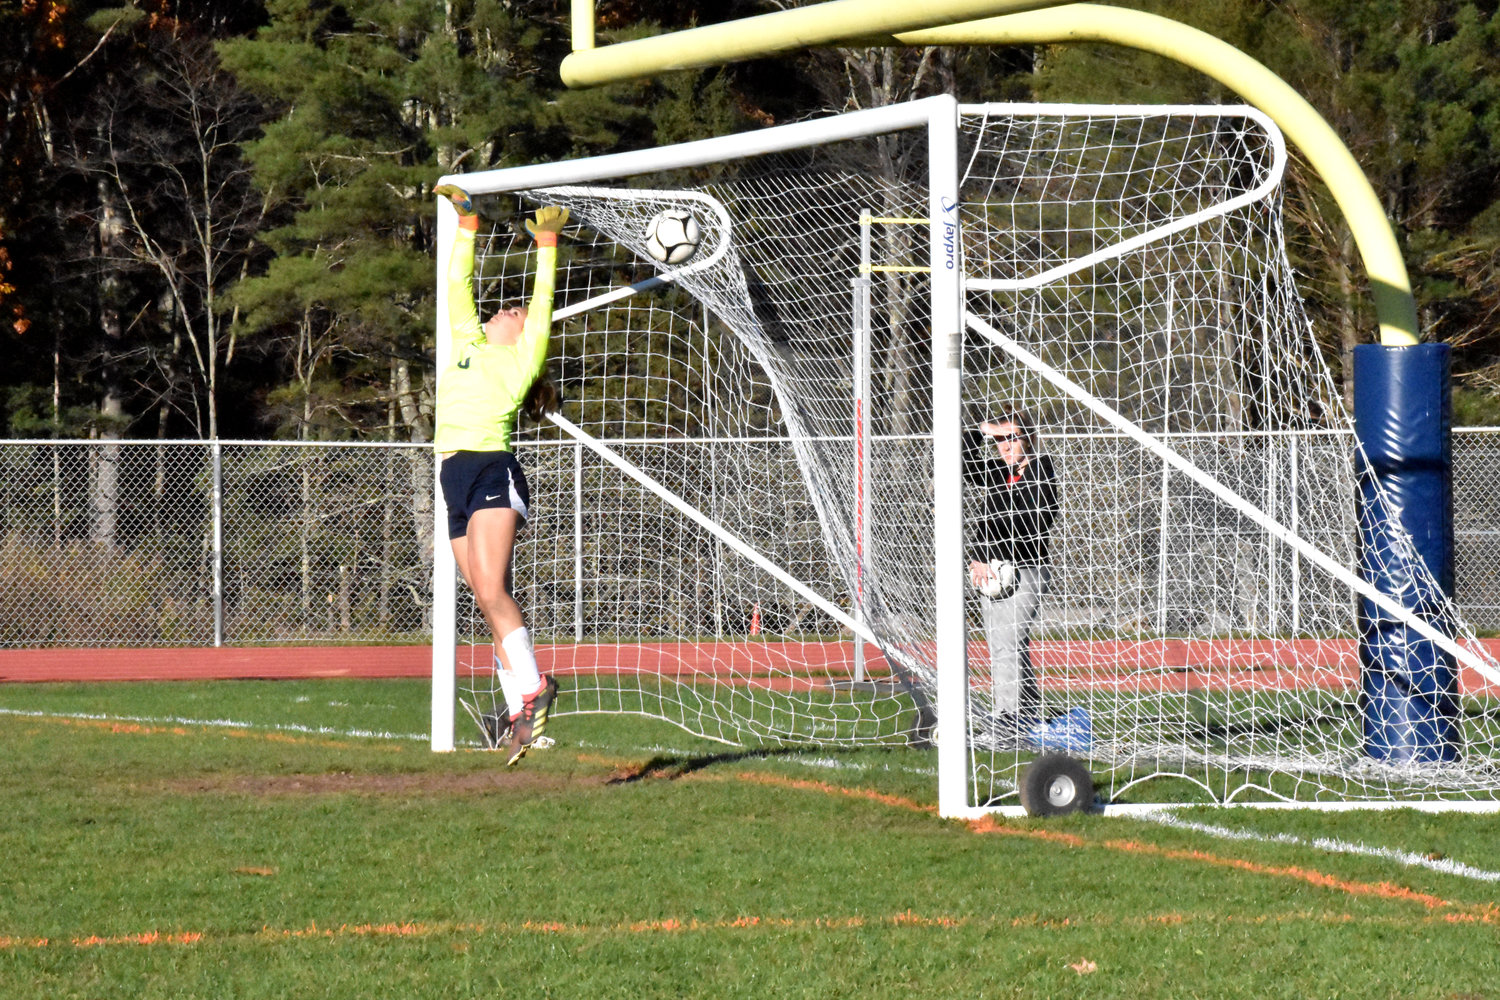 Even without speeding past defenders, Kendall was able to score for the Lady Bears. She buried this shot past Burke’s goalie in their 6-2 playoff win.